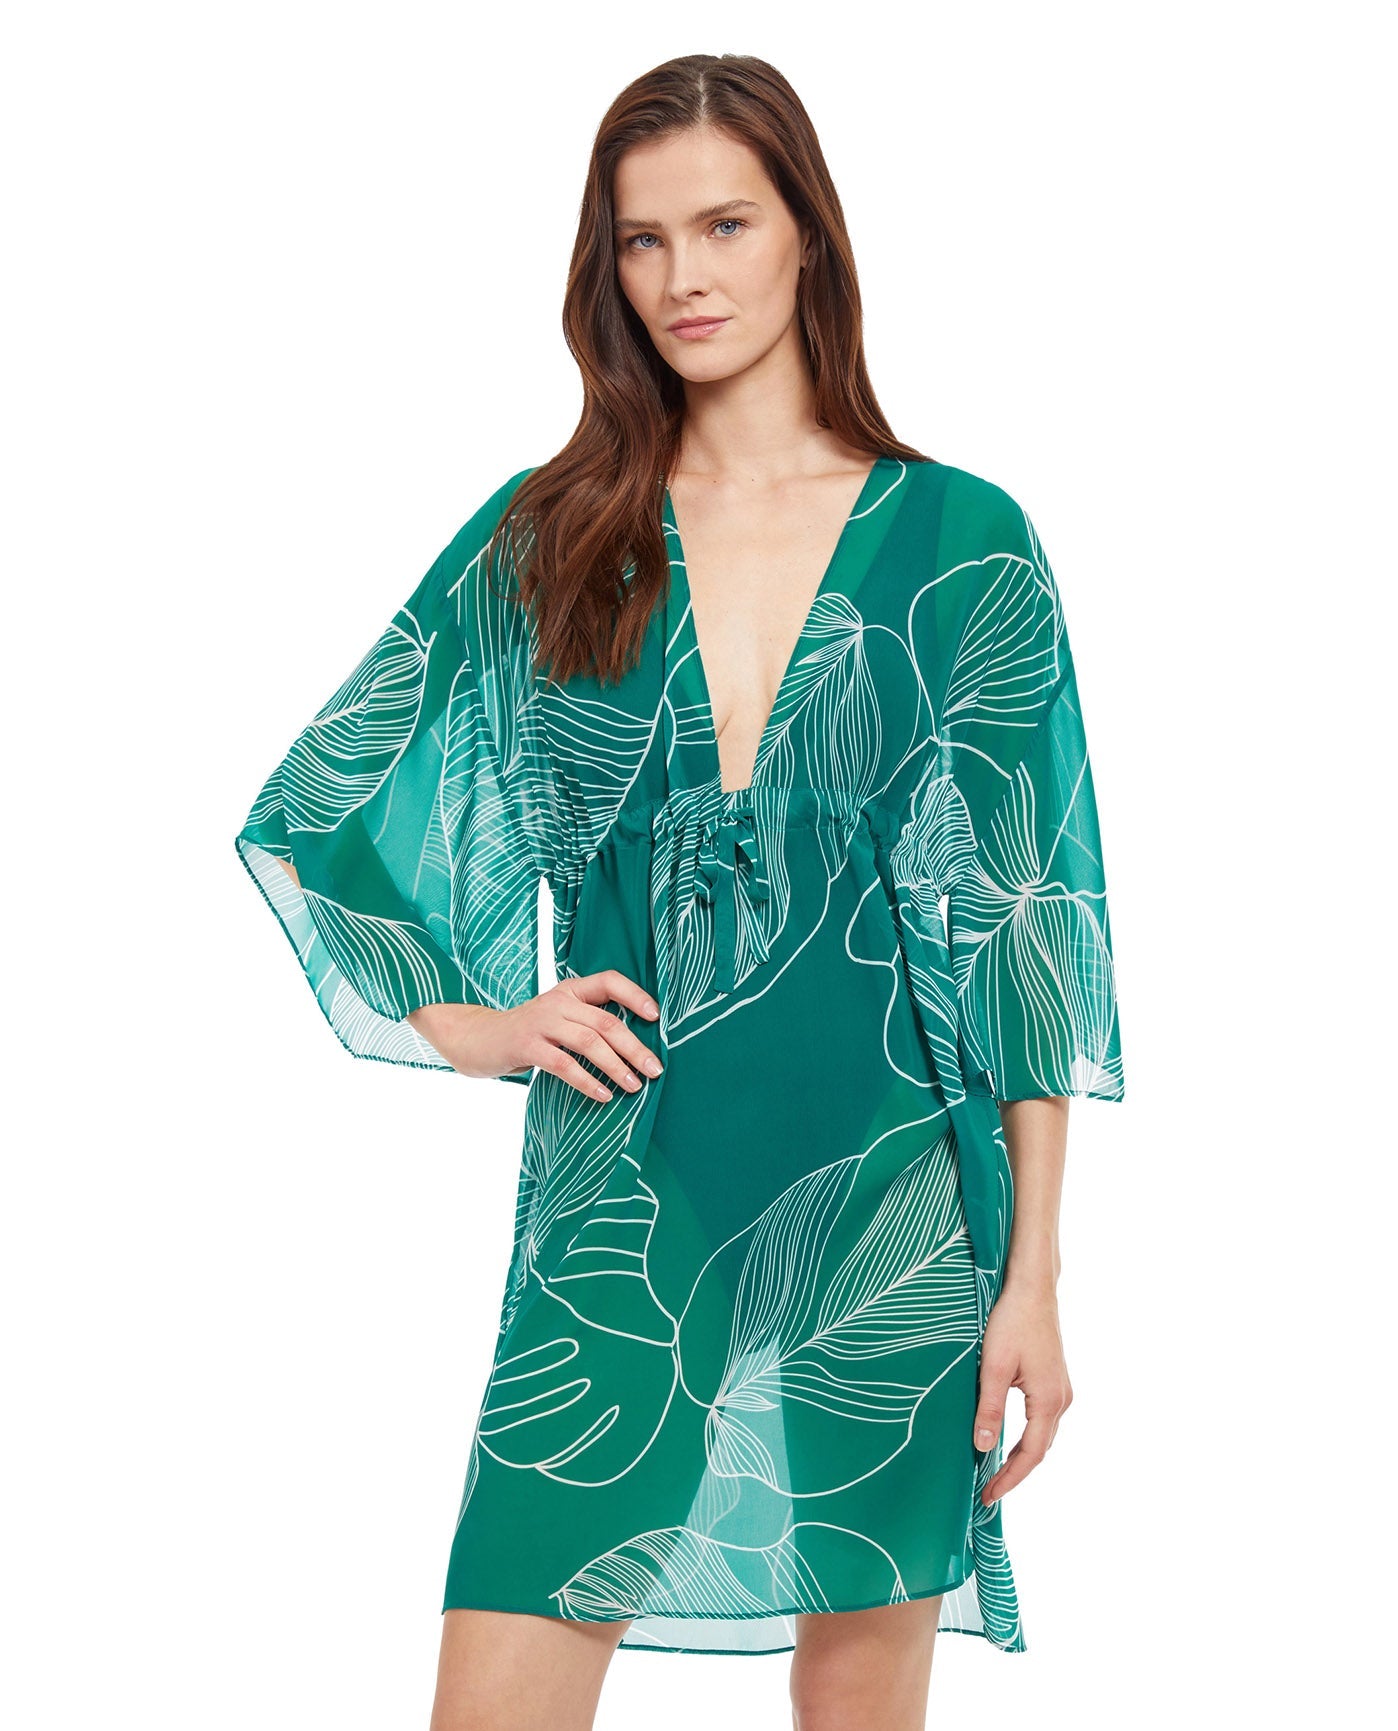 Front View Of Gottex Natural Essence Deep V-Neck Cover Up Dress | Gottex Natural Essence Green And White